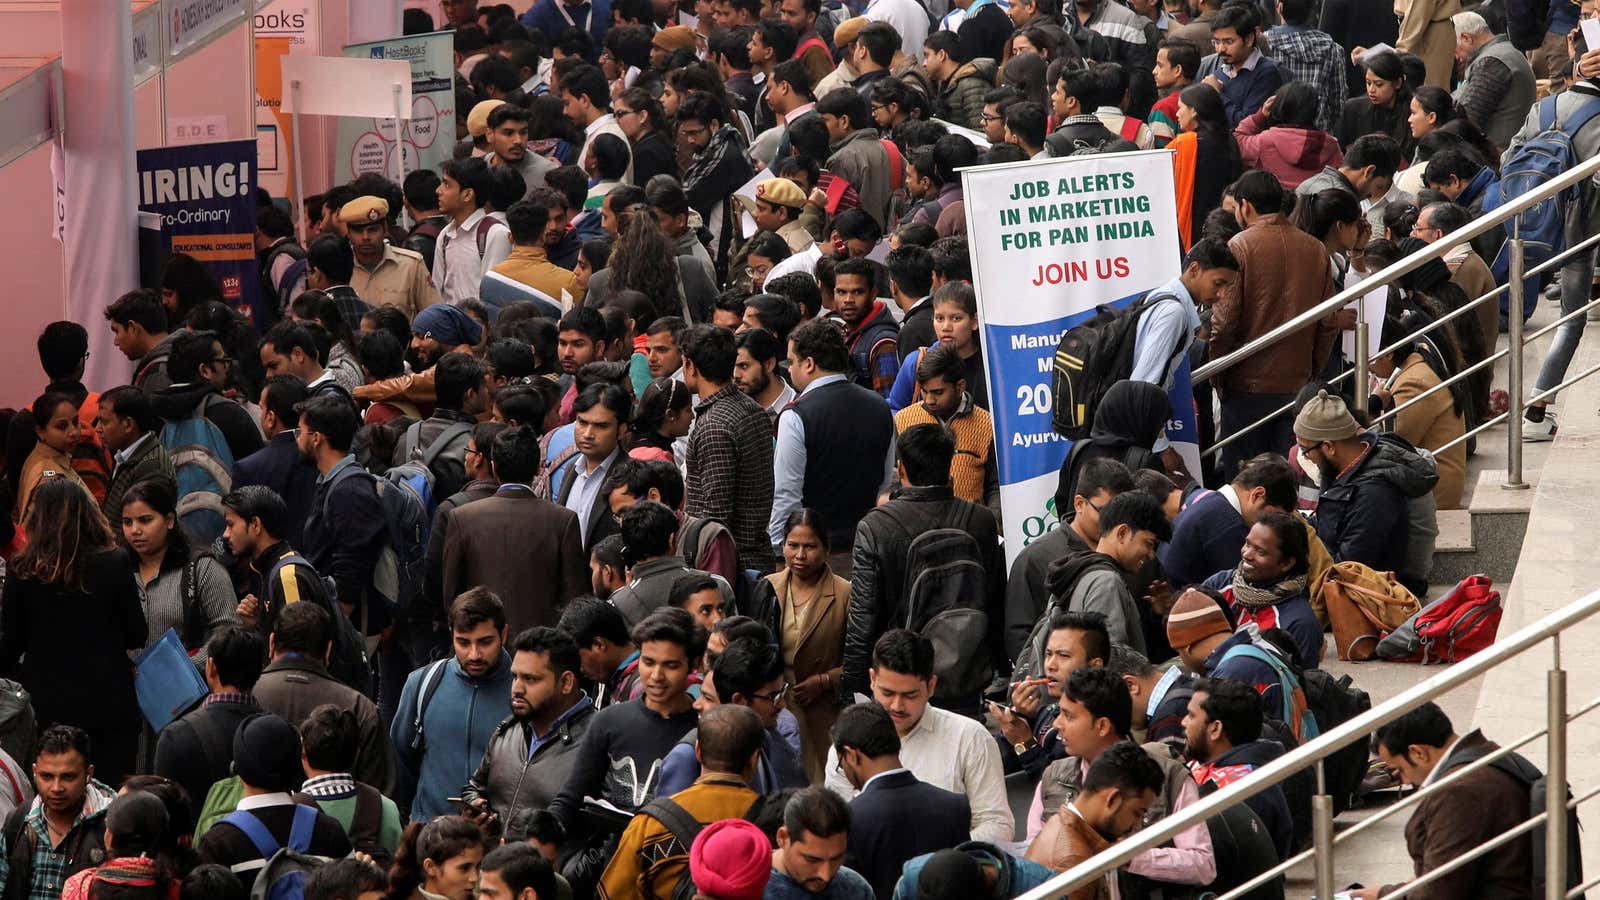 India's numerous jobs scams show the depth of its unemployment crisis